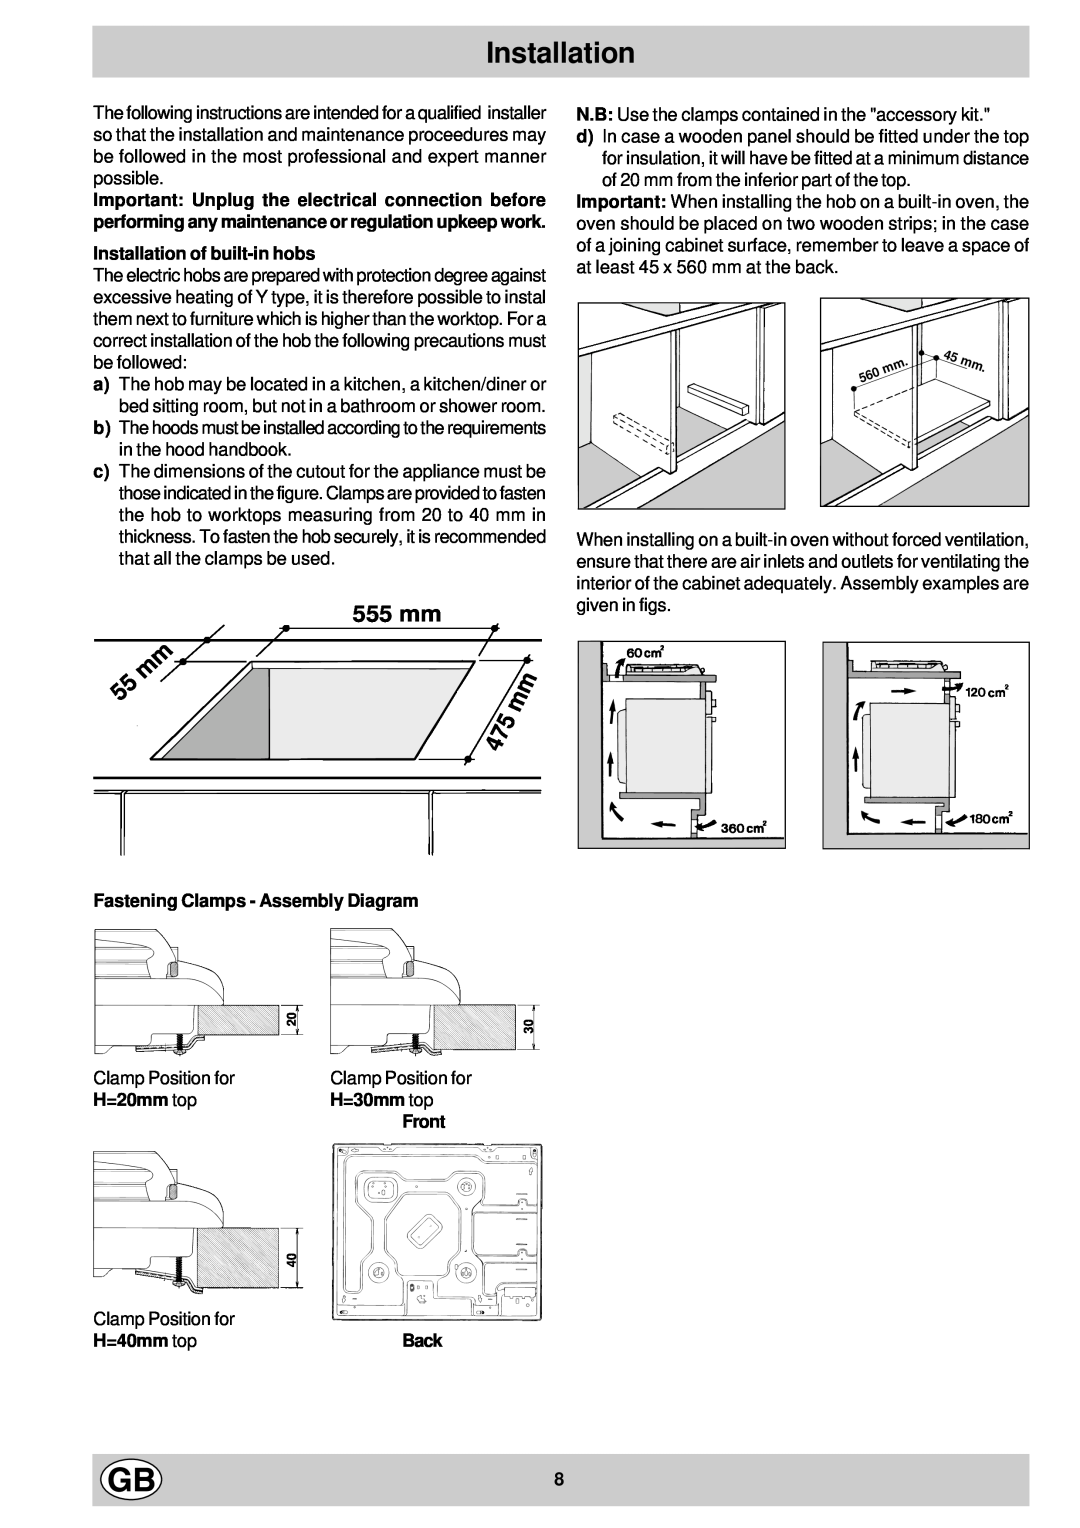 Hotpoint EC604 555 mm, Installation of built-in hobs, Fastening Clamps - Assembly Diagram, H=20mm top, H=30mm top 